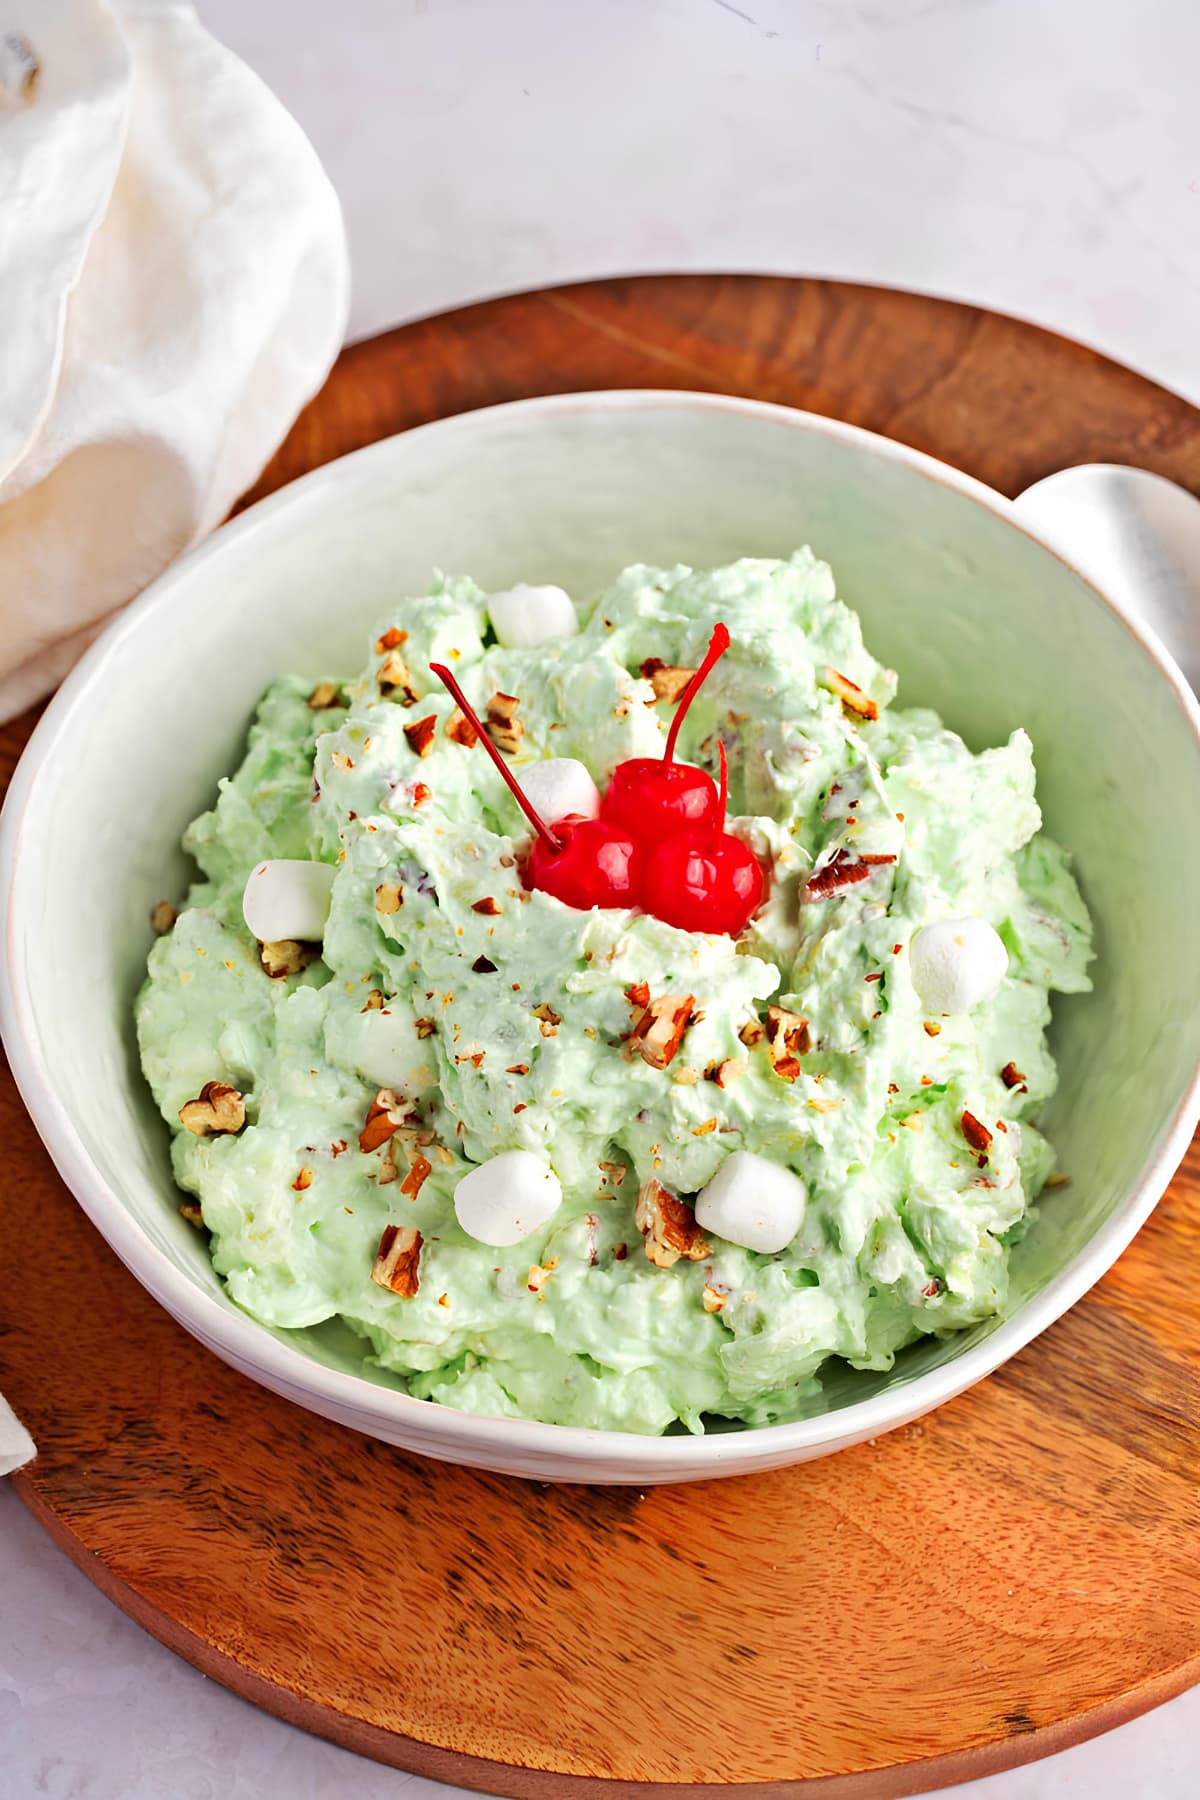 Watergate Salad with Mini-Marshmallows and Cherries